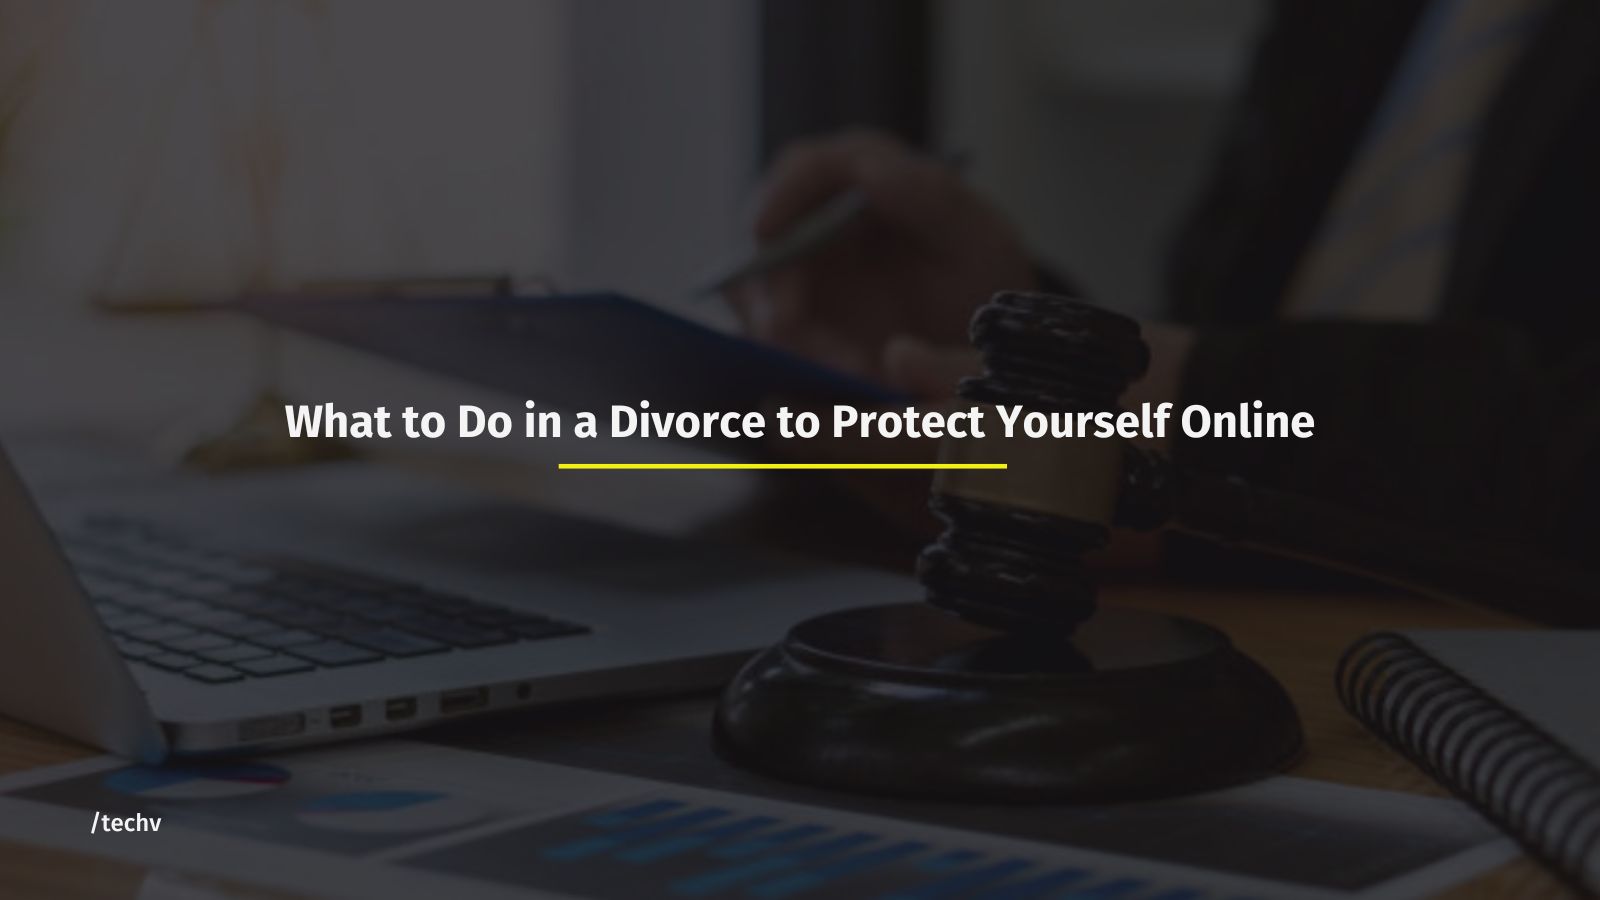 What to Do in a Divorce to Protect Yourself Online